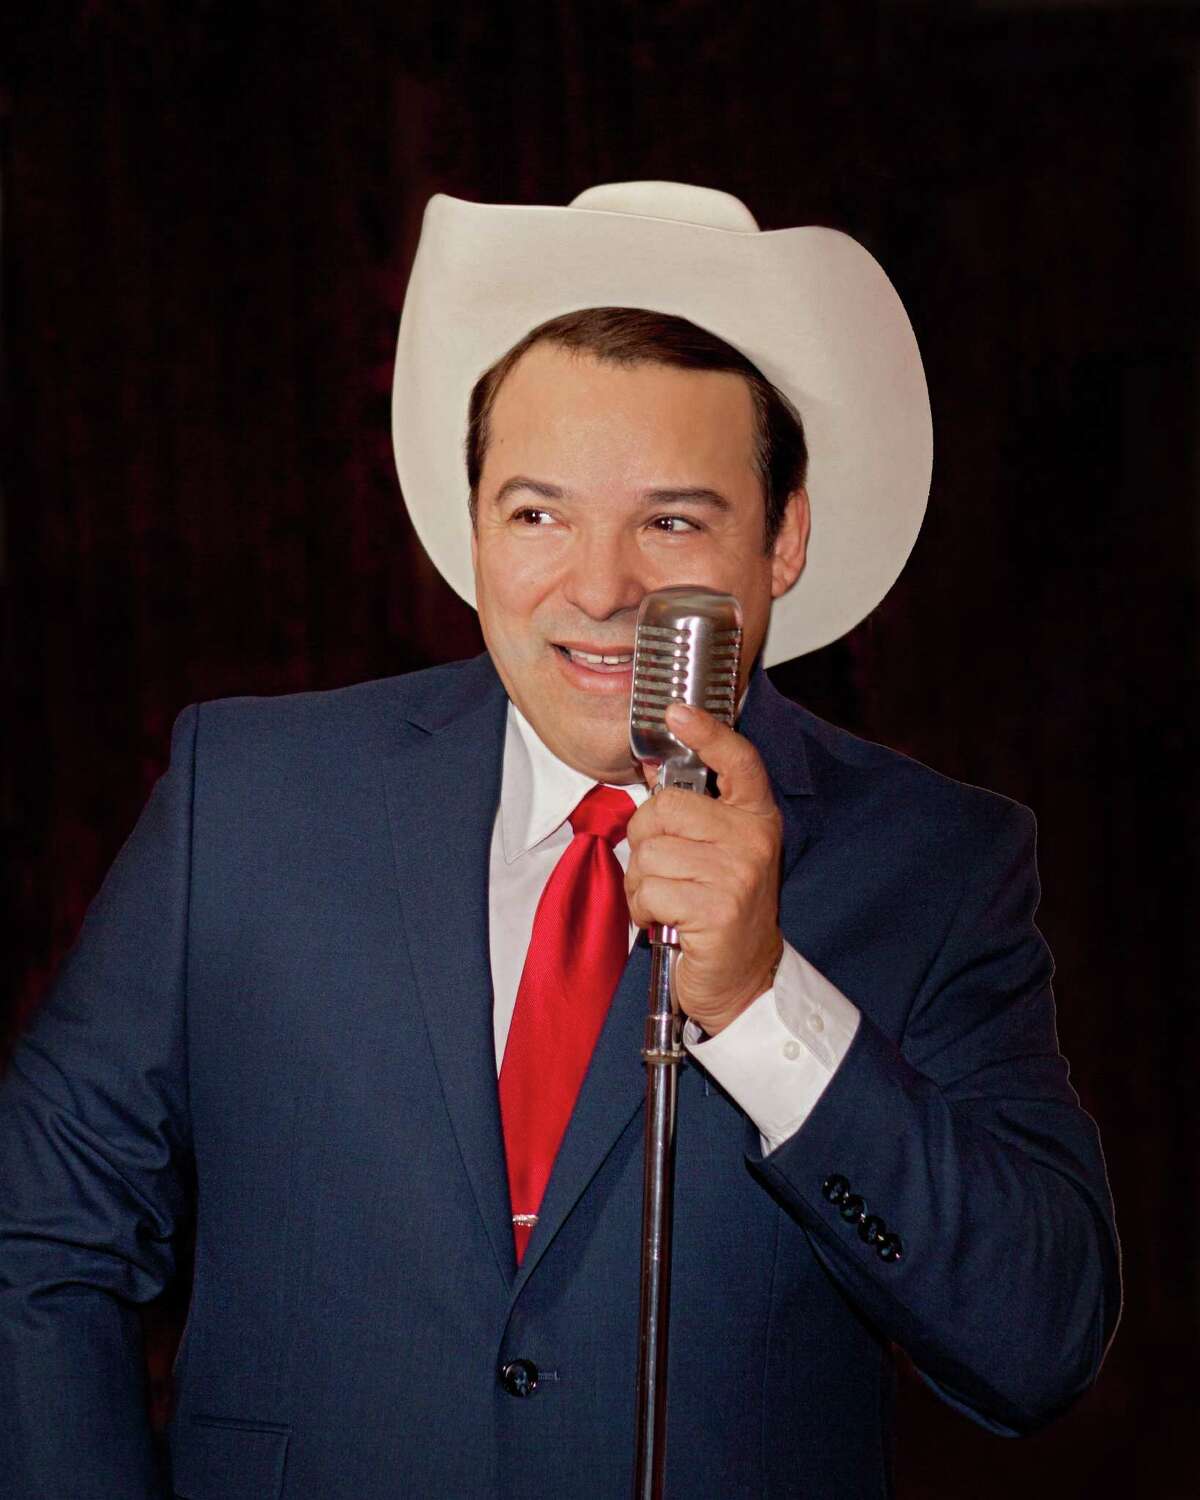 Band leader Billy Mata is finding a bigger audience for his brand of Western swing.